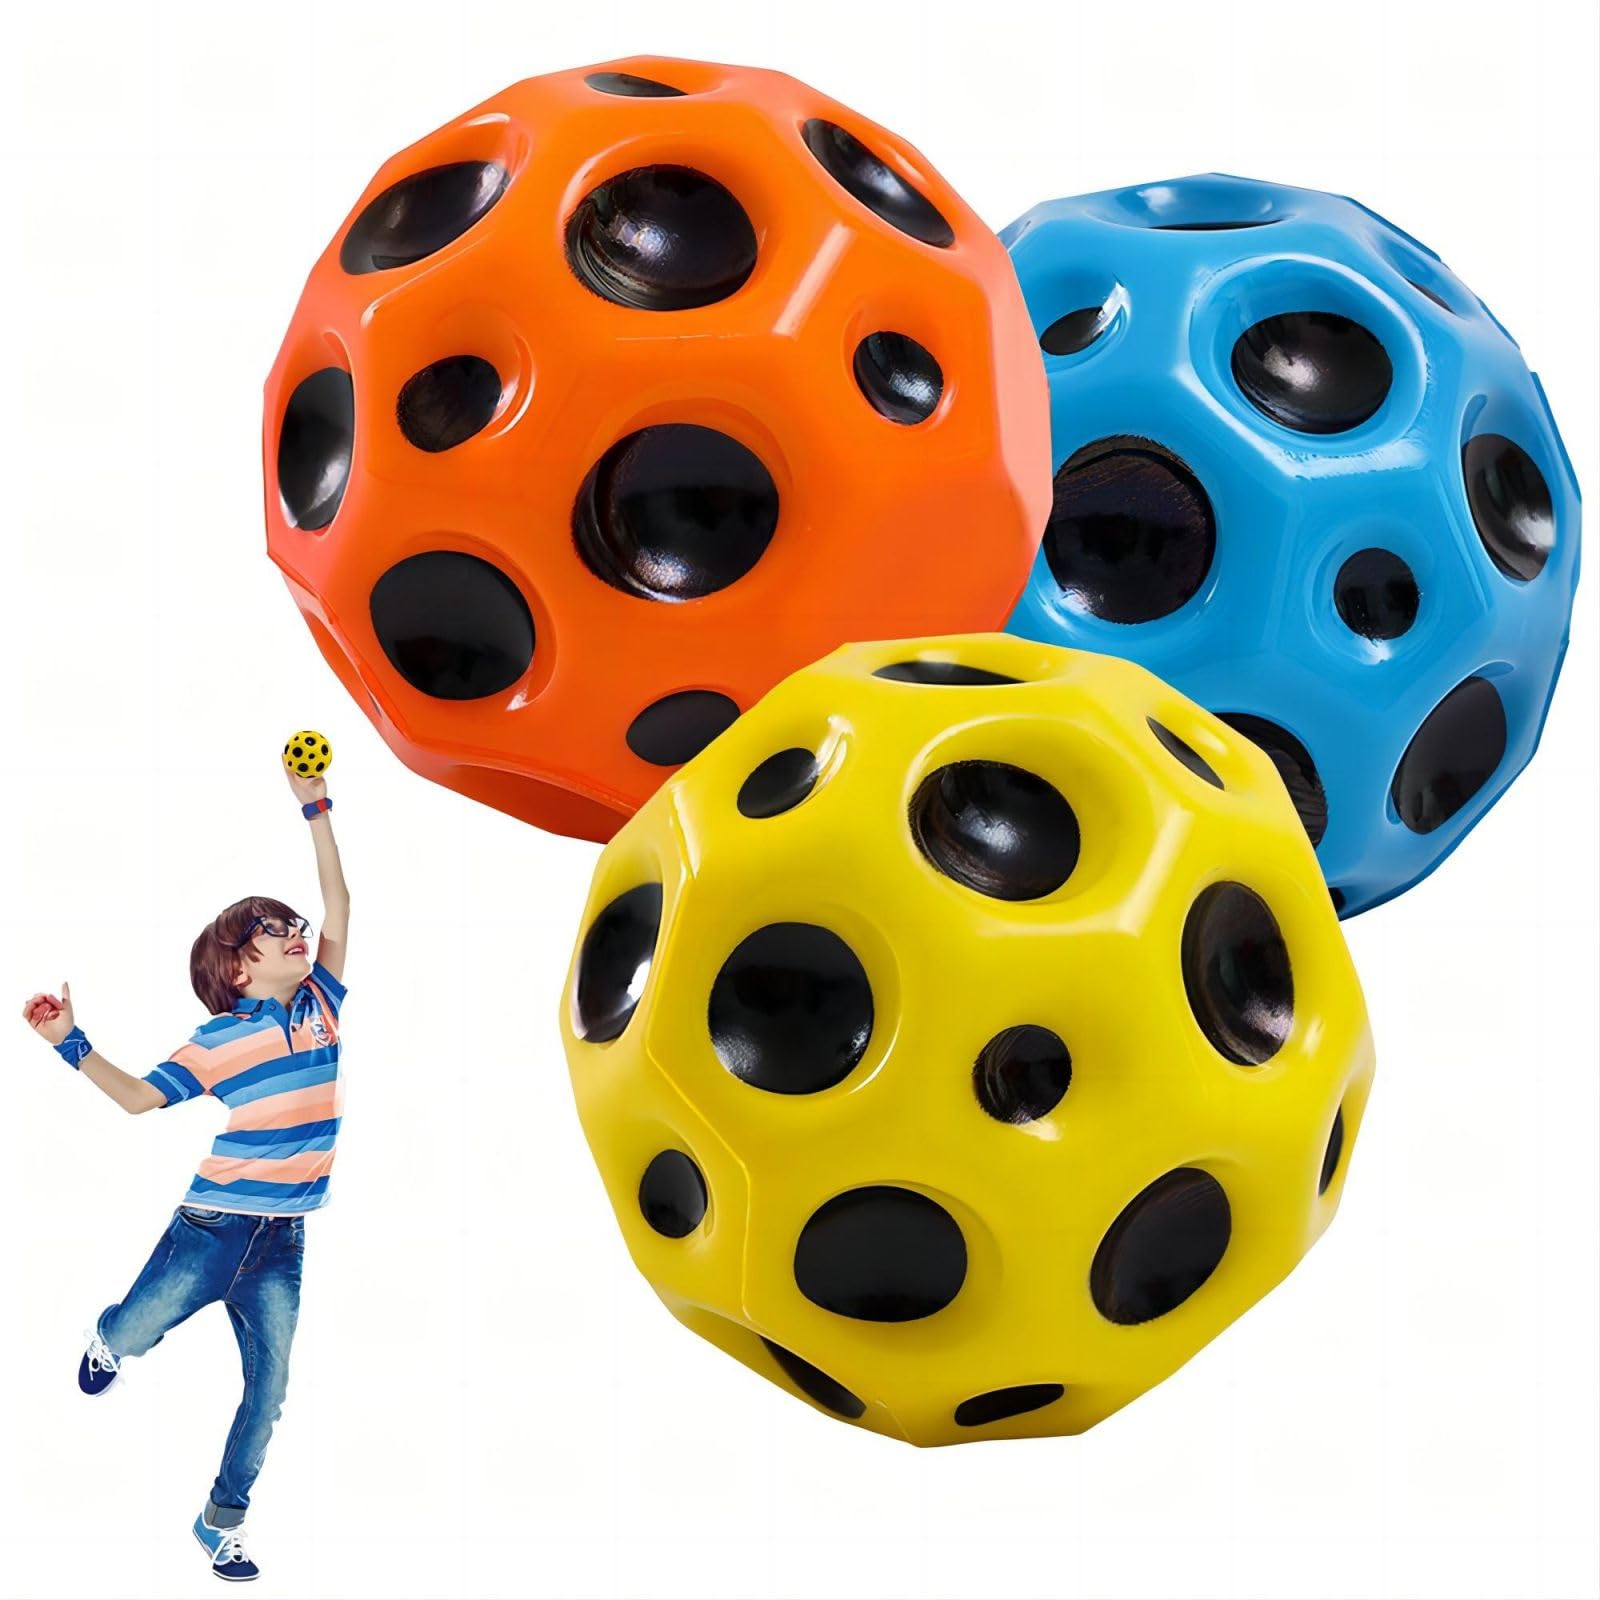 Space Ball - Super High Bouncing Bounciest Lightweight Foam Ball,Improve Hand-Eye Coordination,Easy to Grip and Catch, Which Used by Athletes as a Sport Training Ball,Great Sensory Ball for Kids